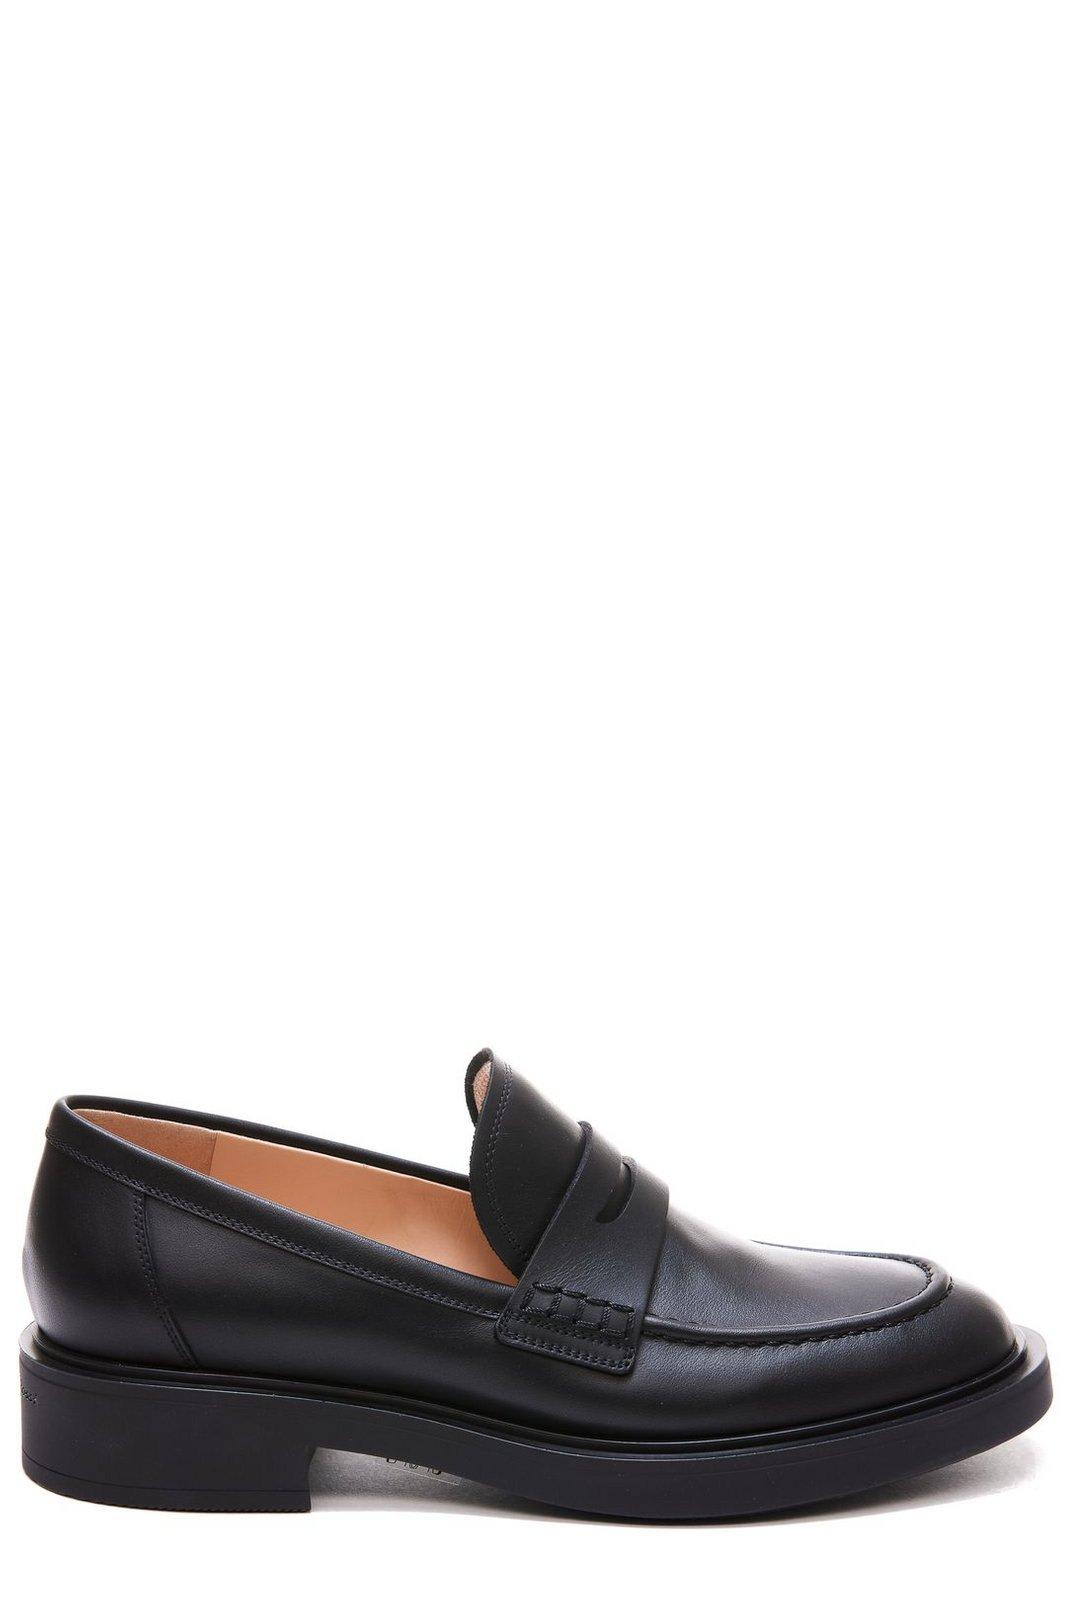 GIANVITO ROSSI HARRIS SLIP-ON PENNY LOAFERS